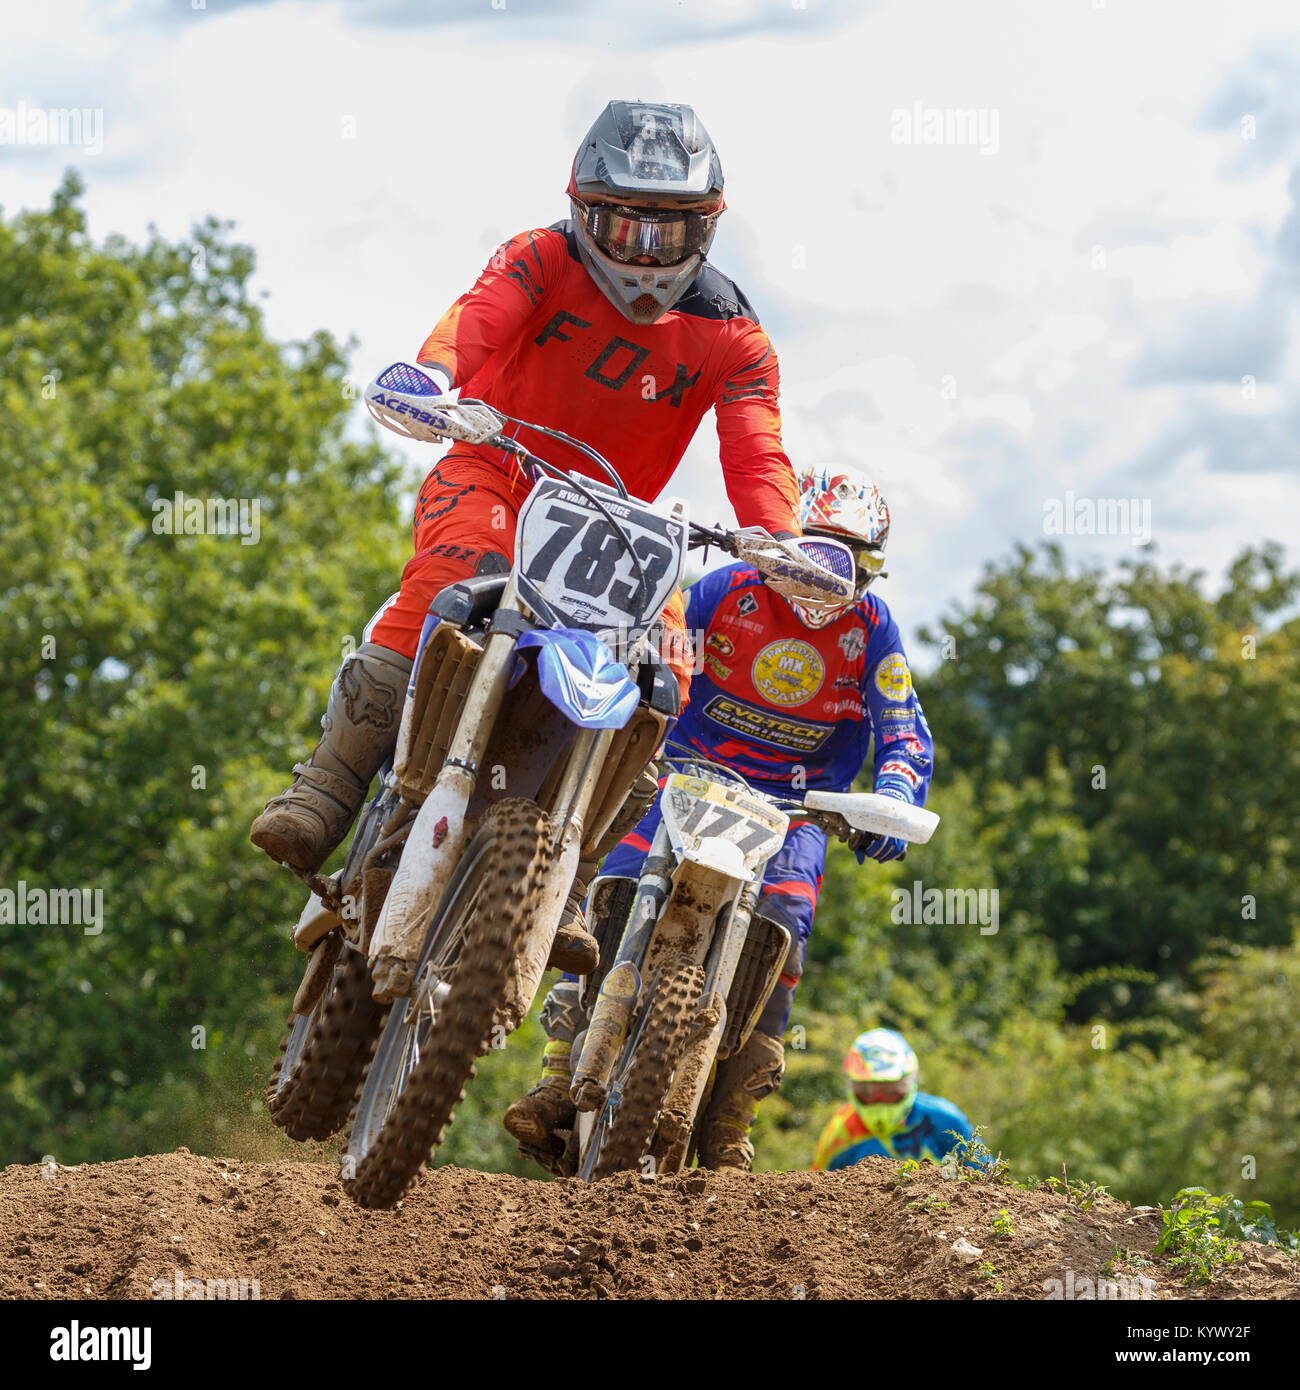 Ryan George on the Smart Energy Services UK Yamaha at the NGR & ACU Eastern EVO Championships, Cadders Hill, Lyng, Norfolk, UK. Stock Photo